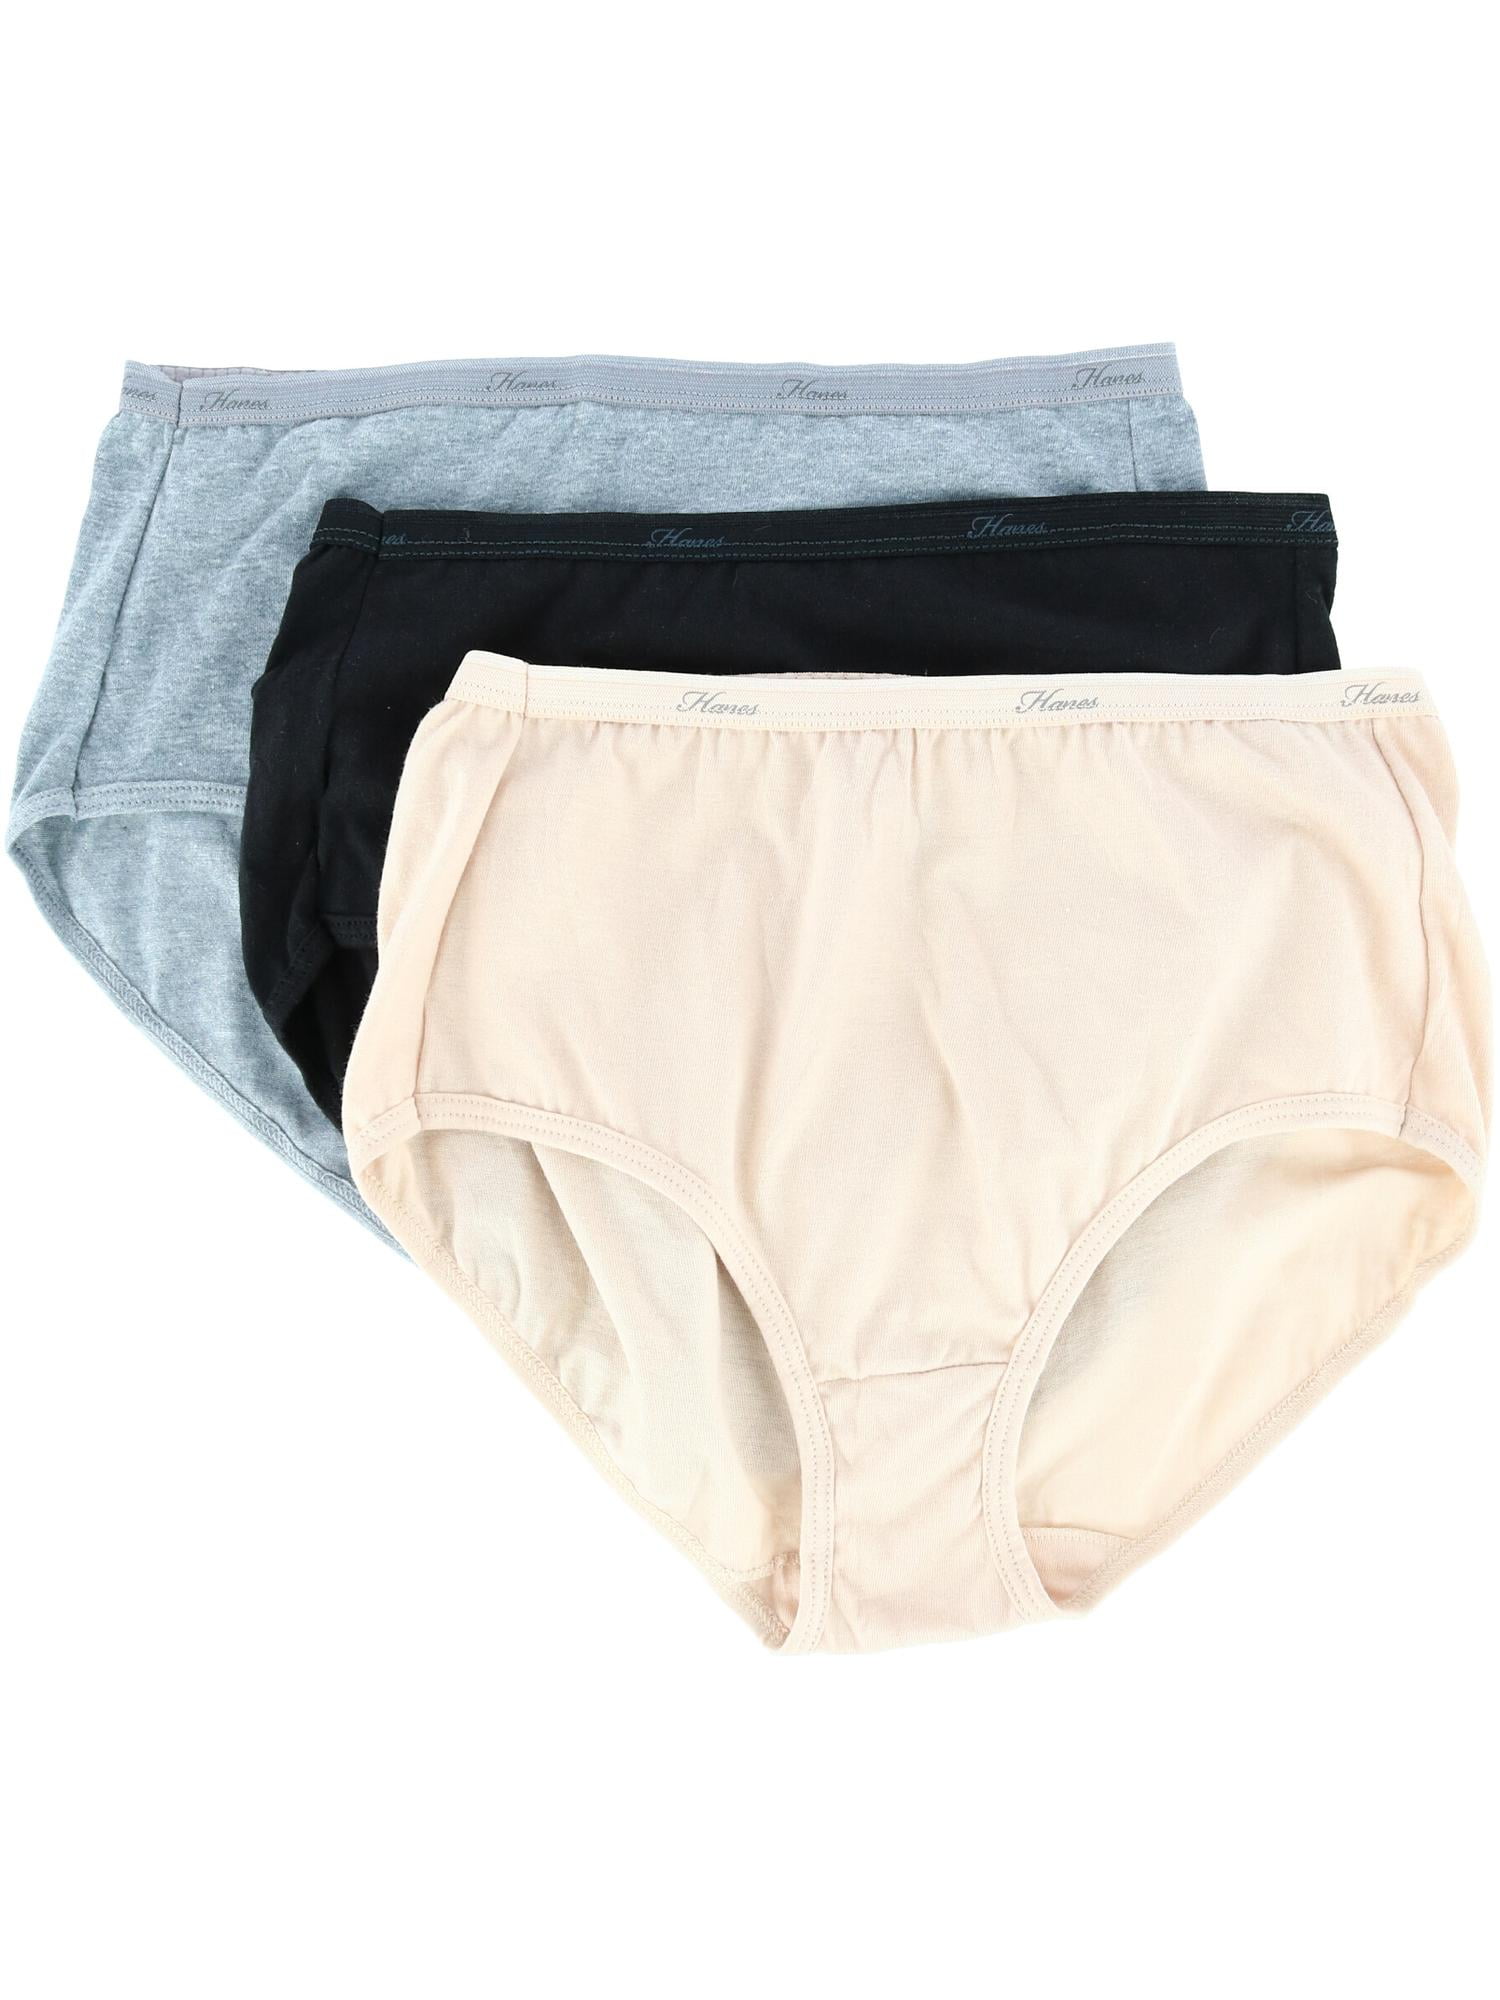 Women's High Waisted Cotton Brief Panties - 3 Pack - Silverts